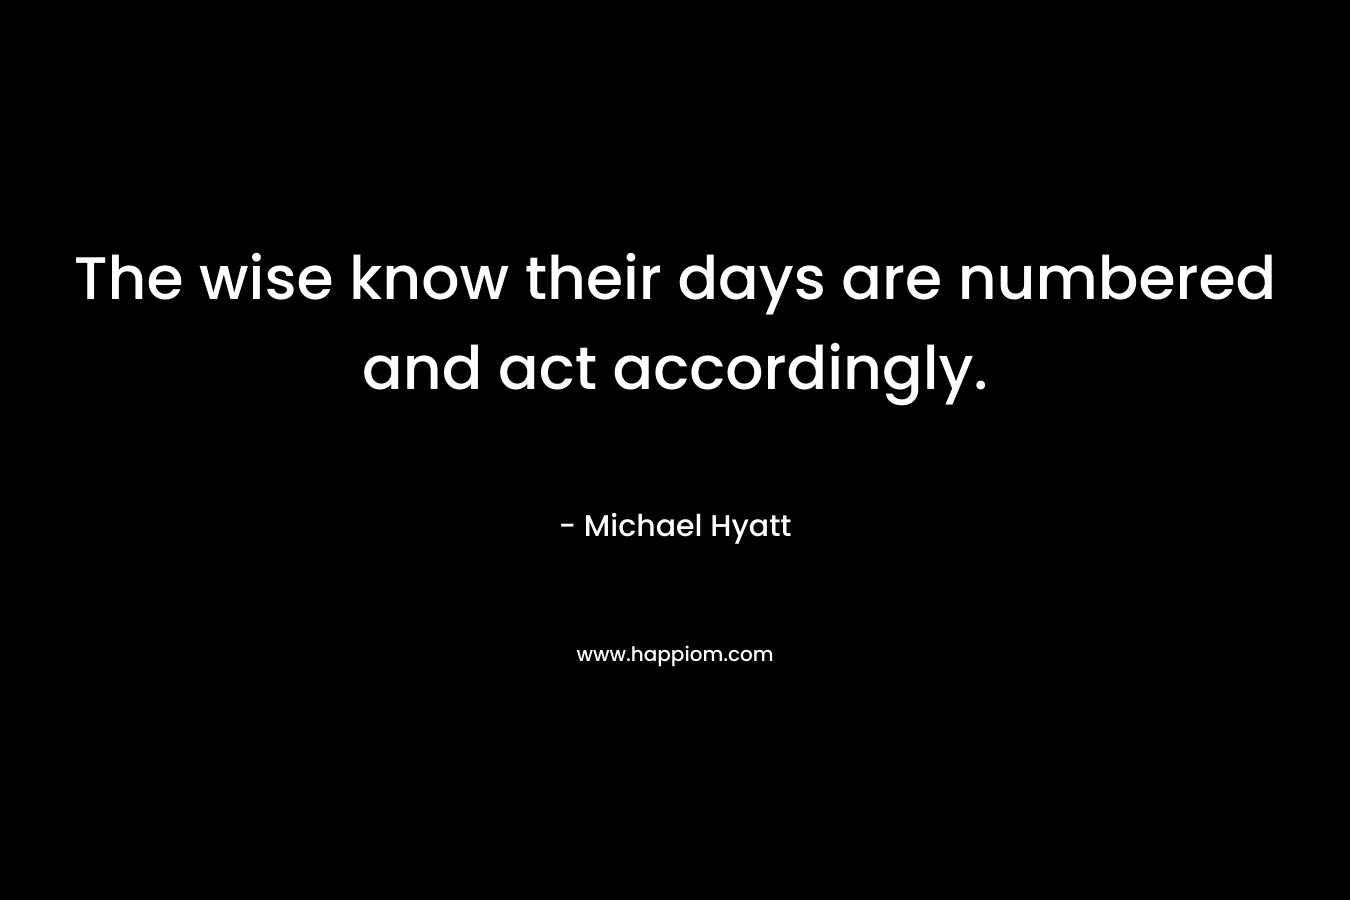 The wise know their days are numbered and act accordingly.